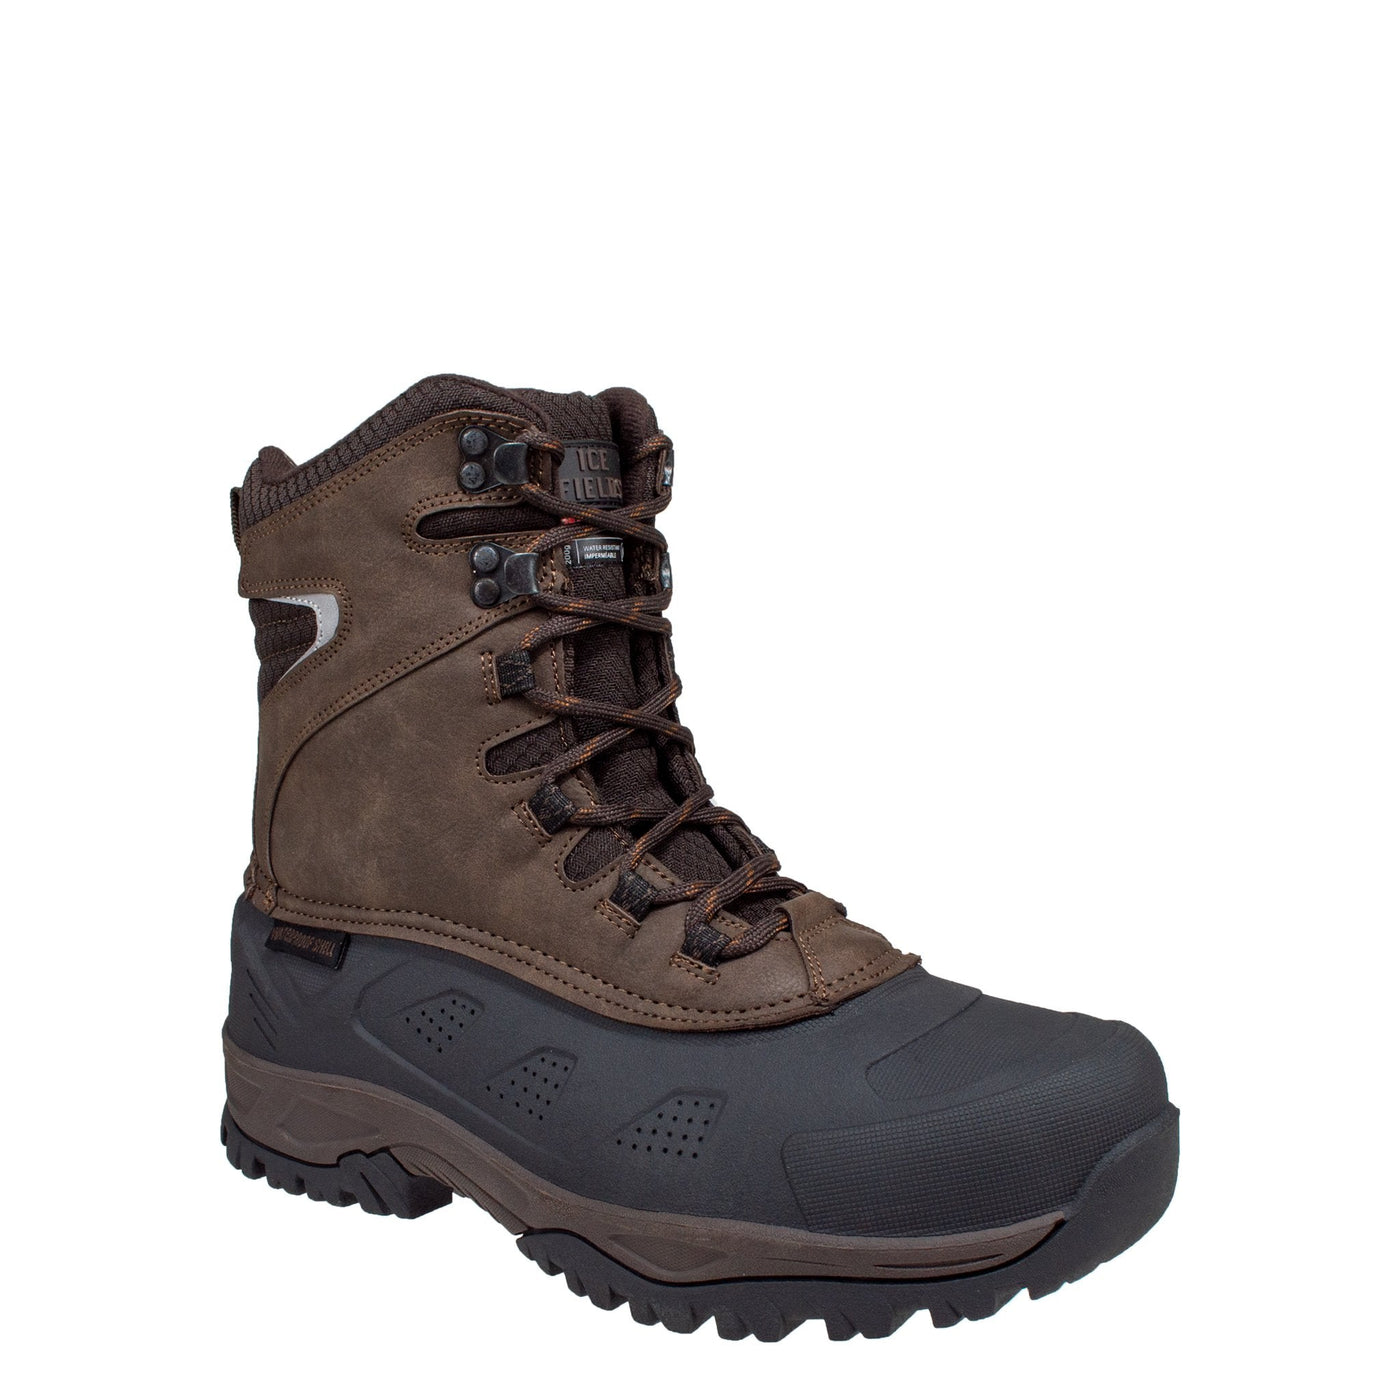 men's mid height, brown, synthetic leather, insulated shell boot with speed hooks